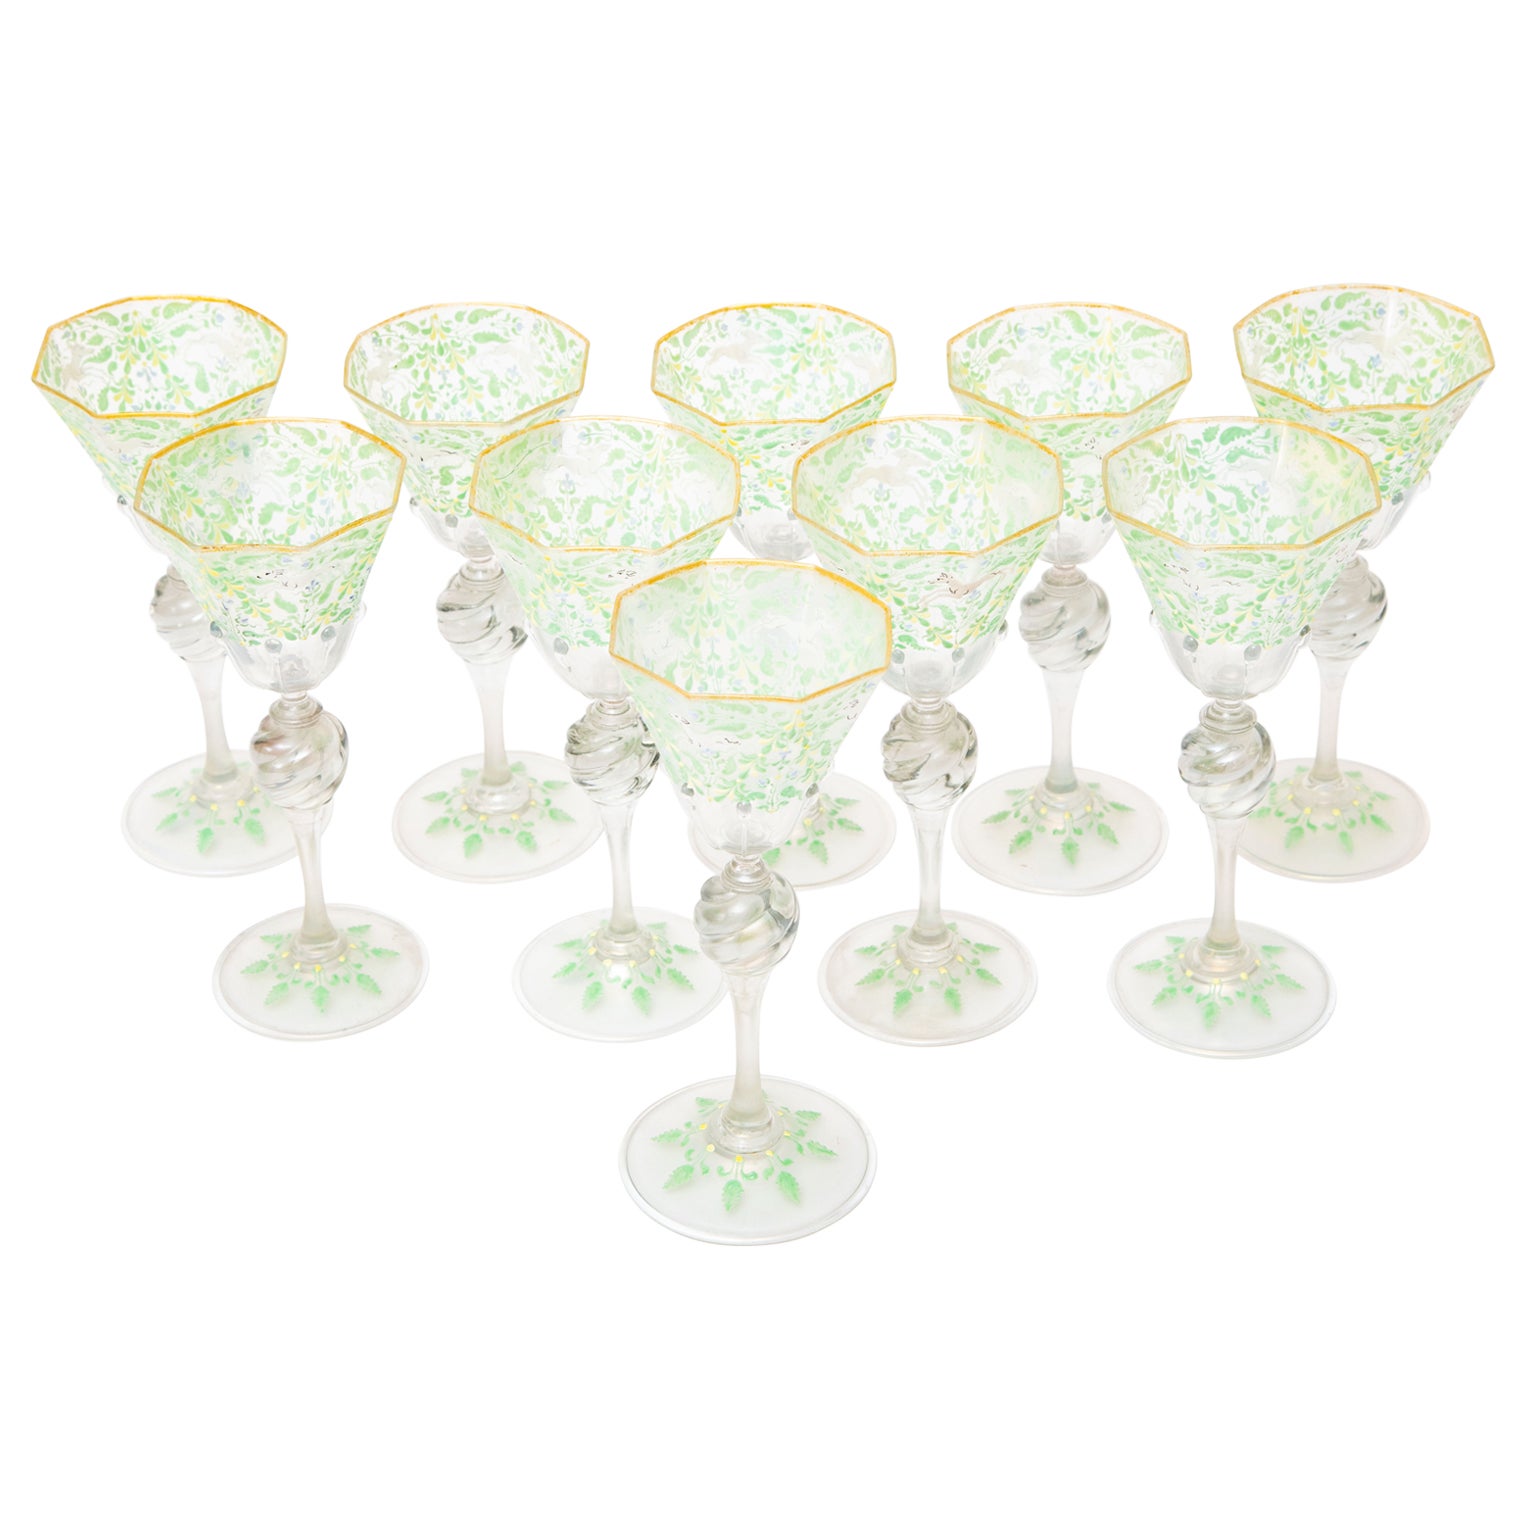 10 Antique Venetian Goblets, Hand Enameled circa 1890 with Knob Stems For Sale